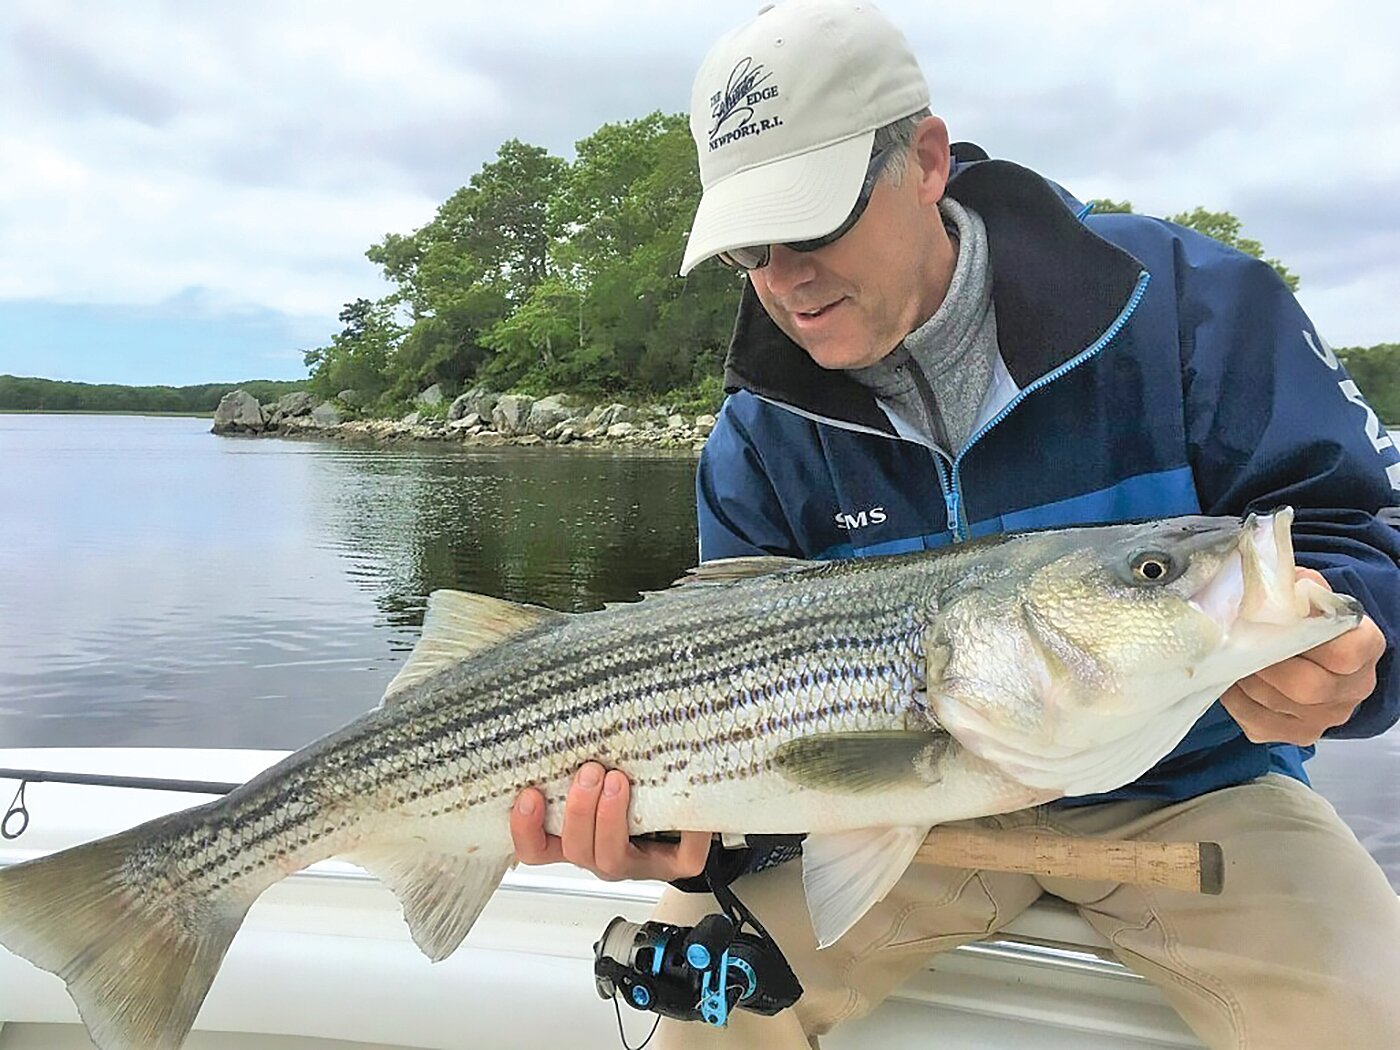 Peter Jenkins, chairman of the board of the American Saltwater Guides Association and owner of the Saltwater Edge, Middletown, says striped bass in trouble and asks anglers to take action.